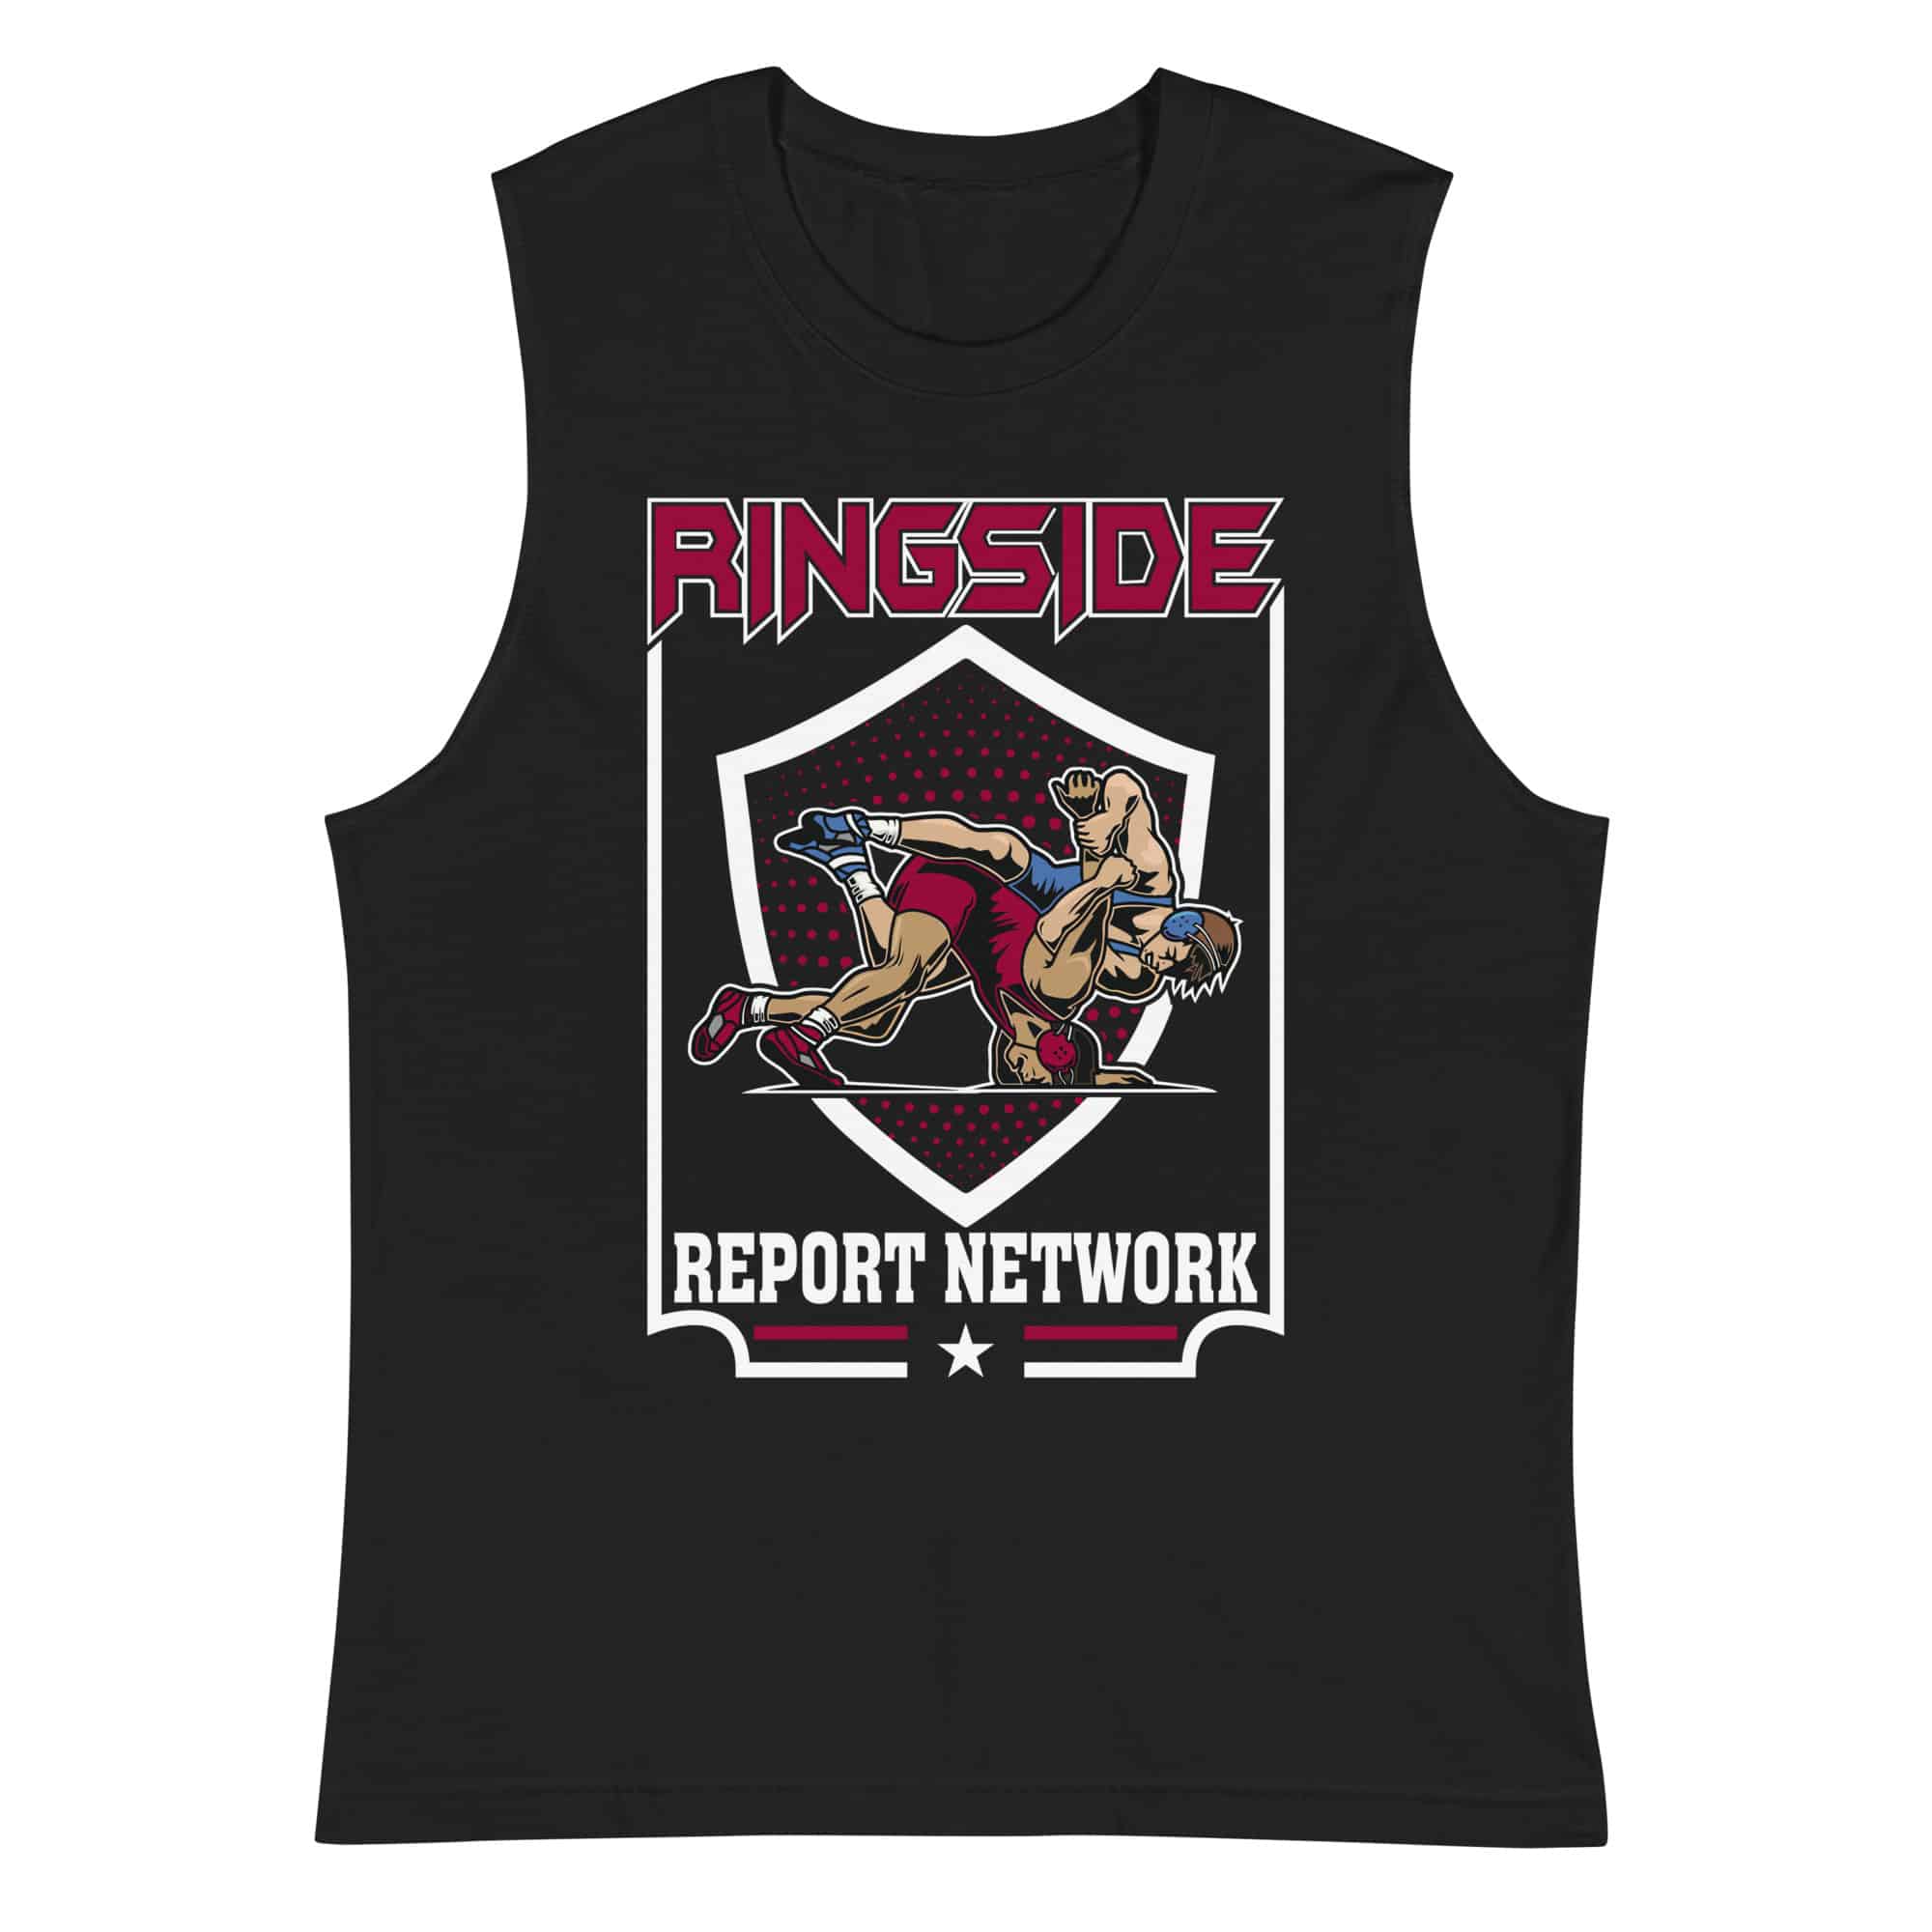 Ringside Report Network Muscle Shirt